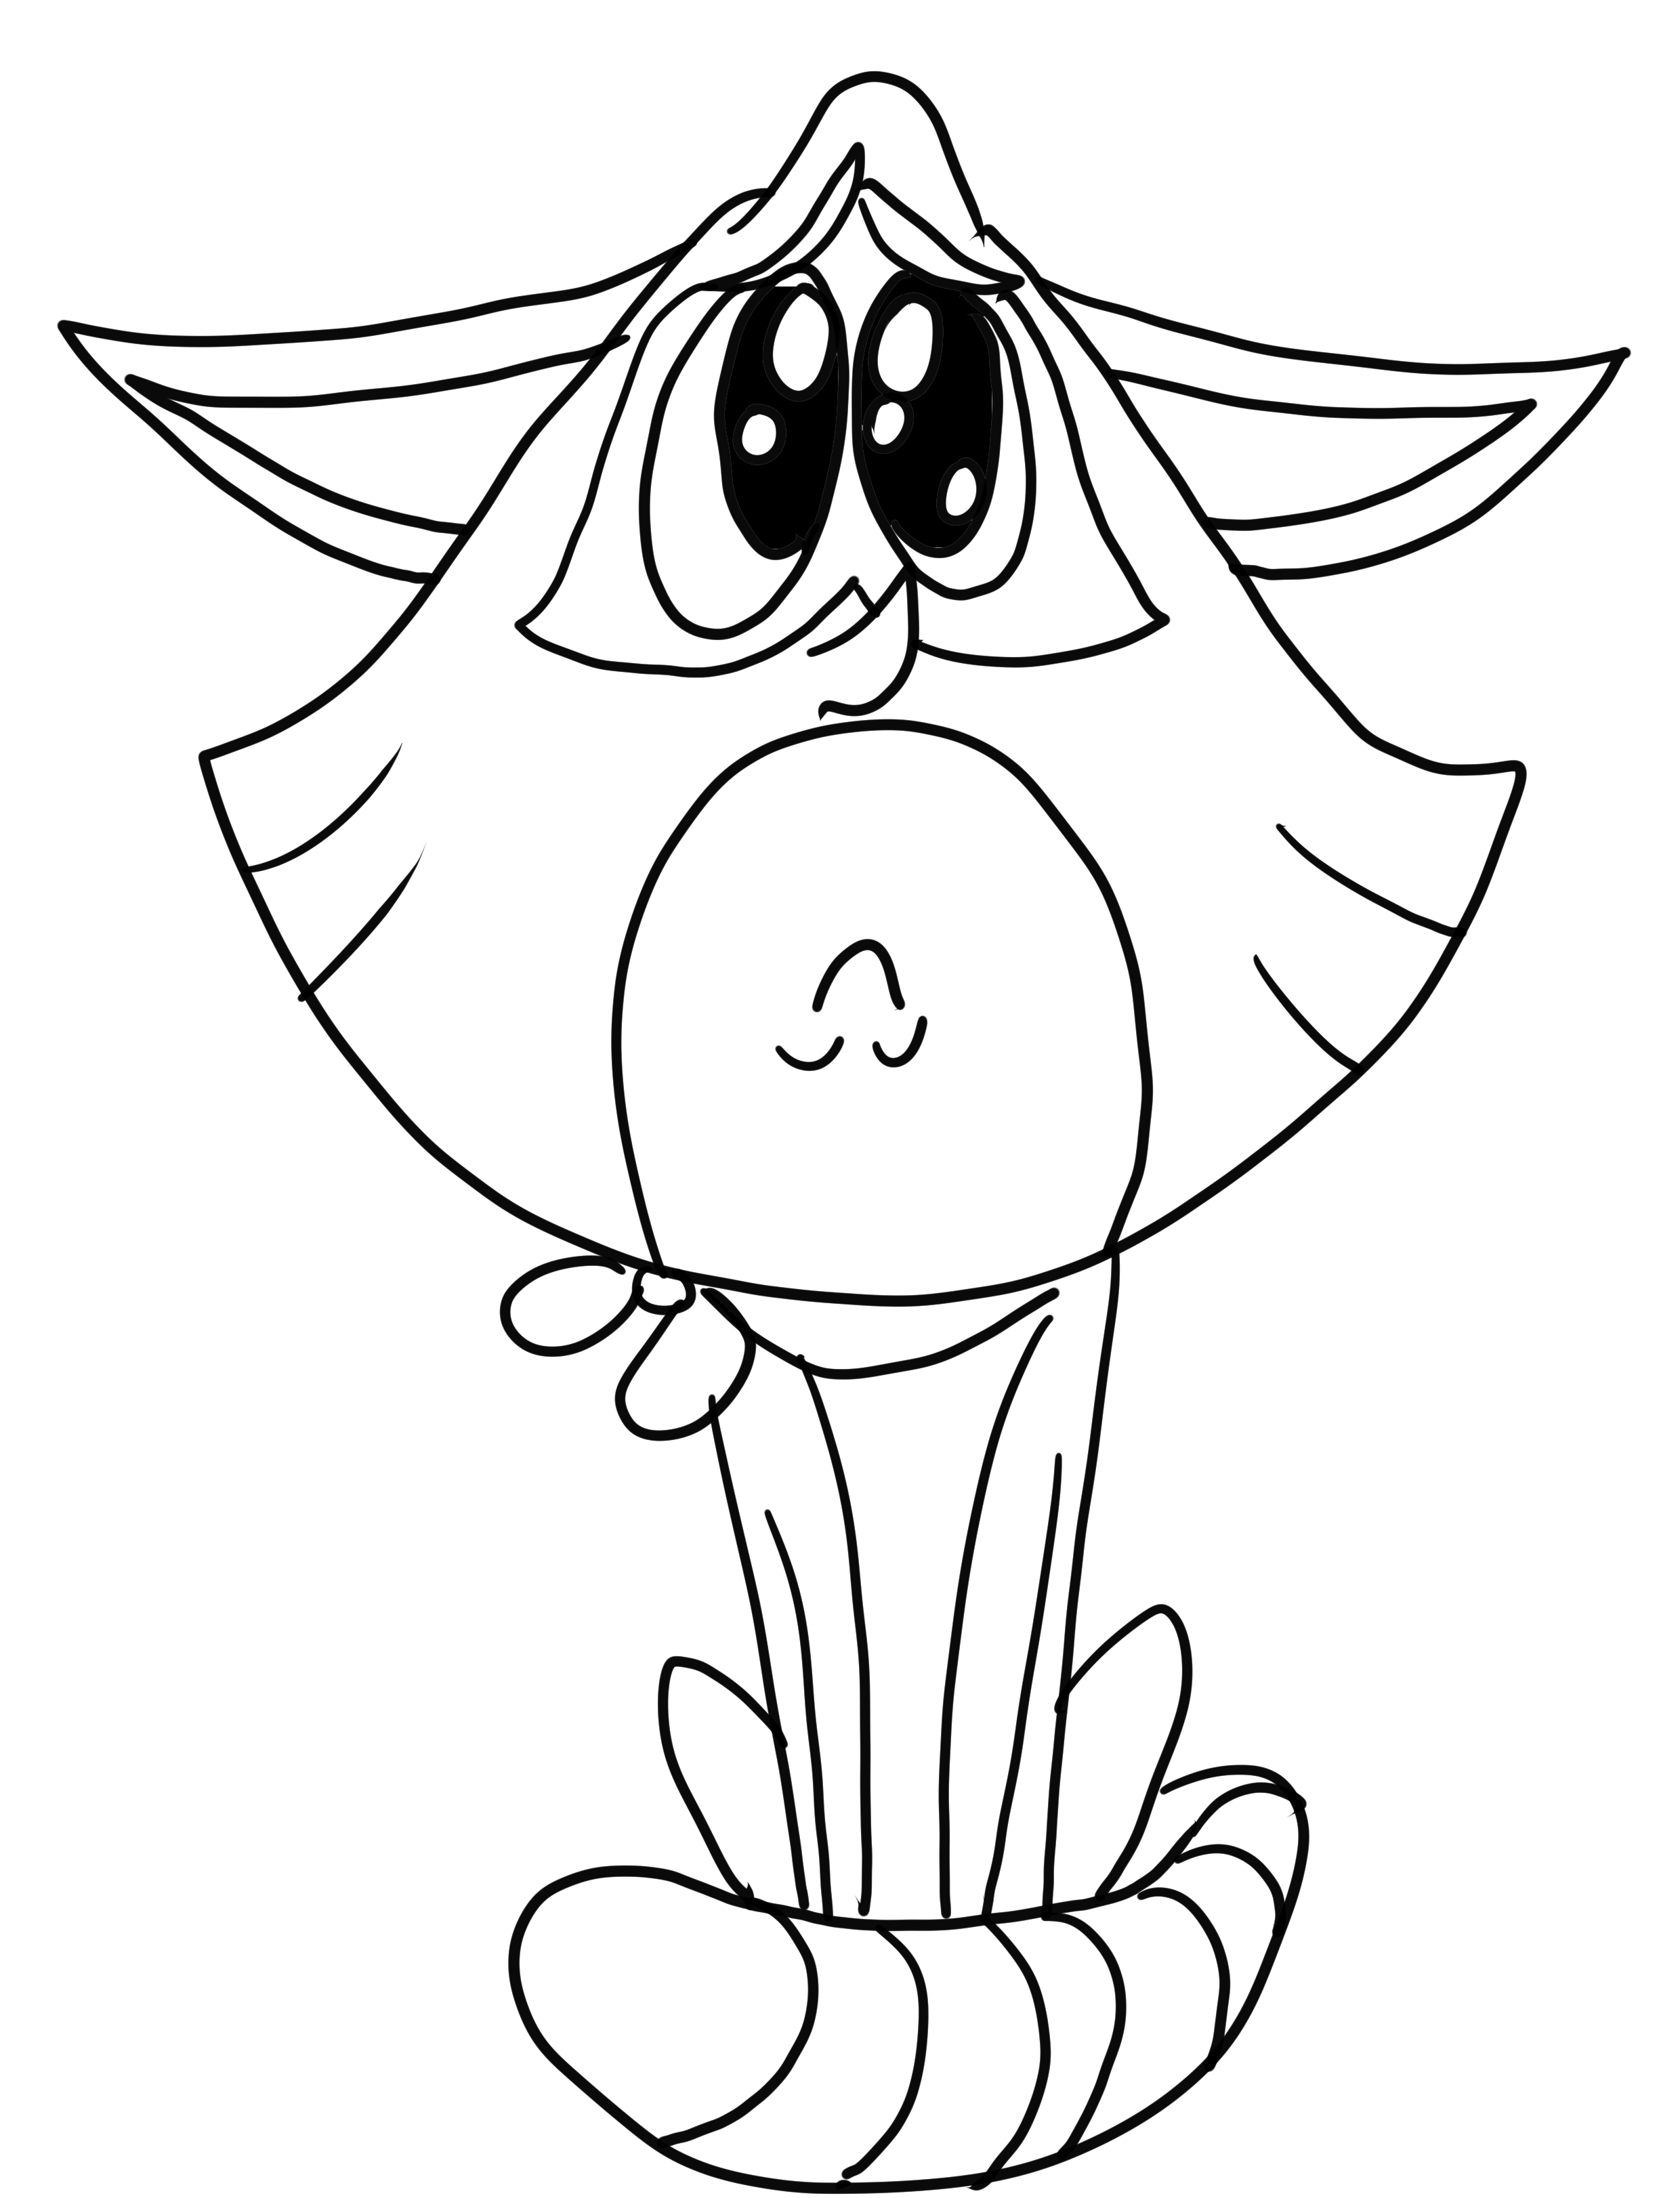 Taffy 05 from Taffy coloring page to print and coloring